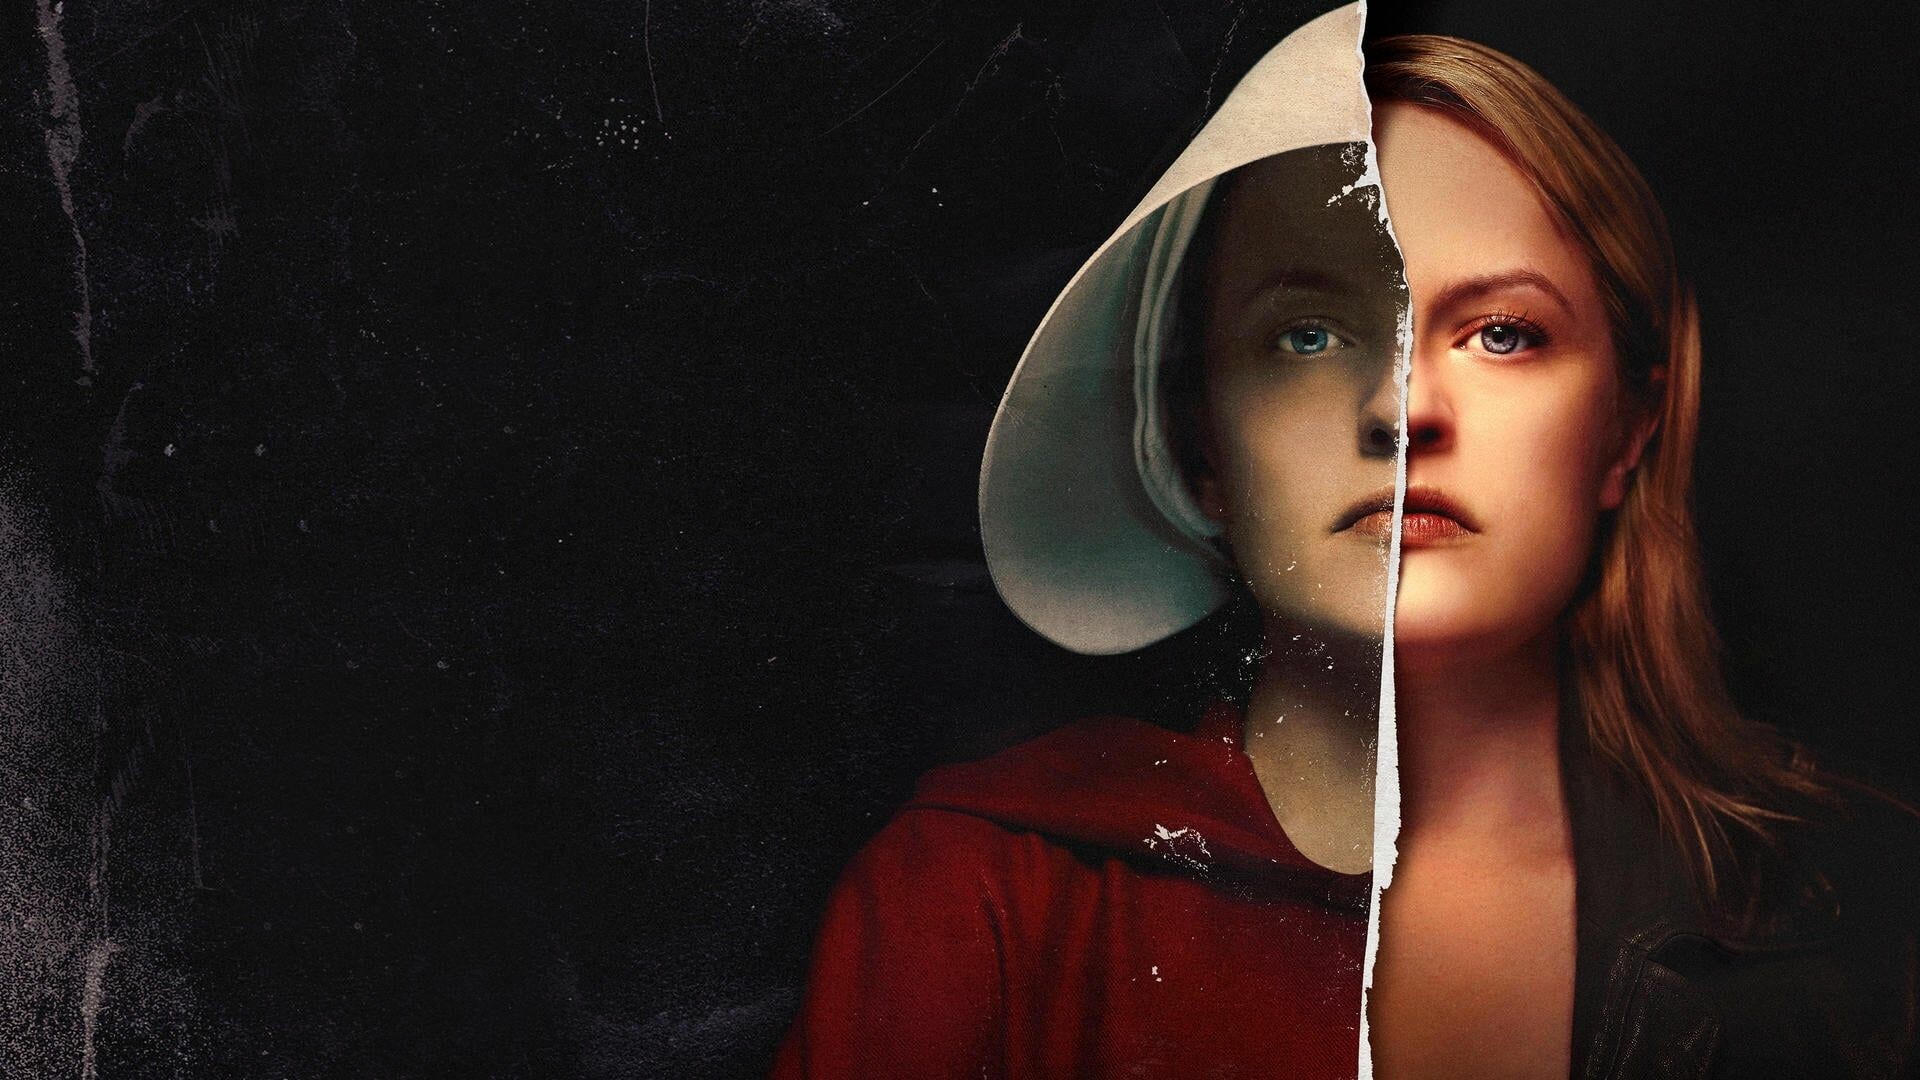 The Handmaid's Tale: June Osborne, Offred, The protagonist. 1920x1080 Full HD Background.